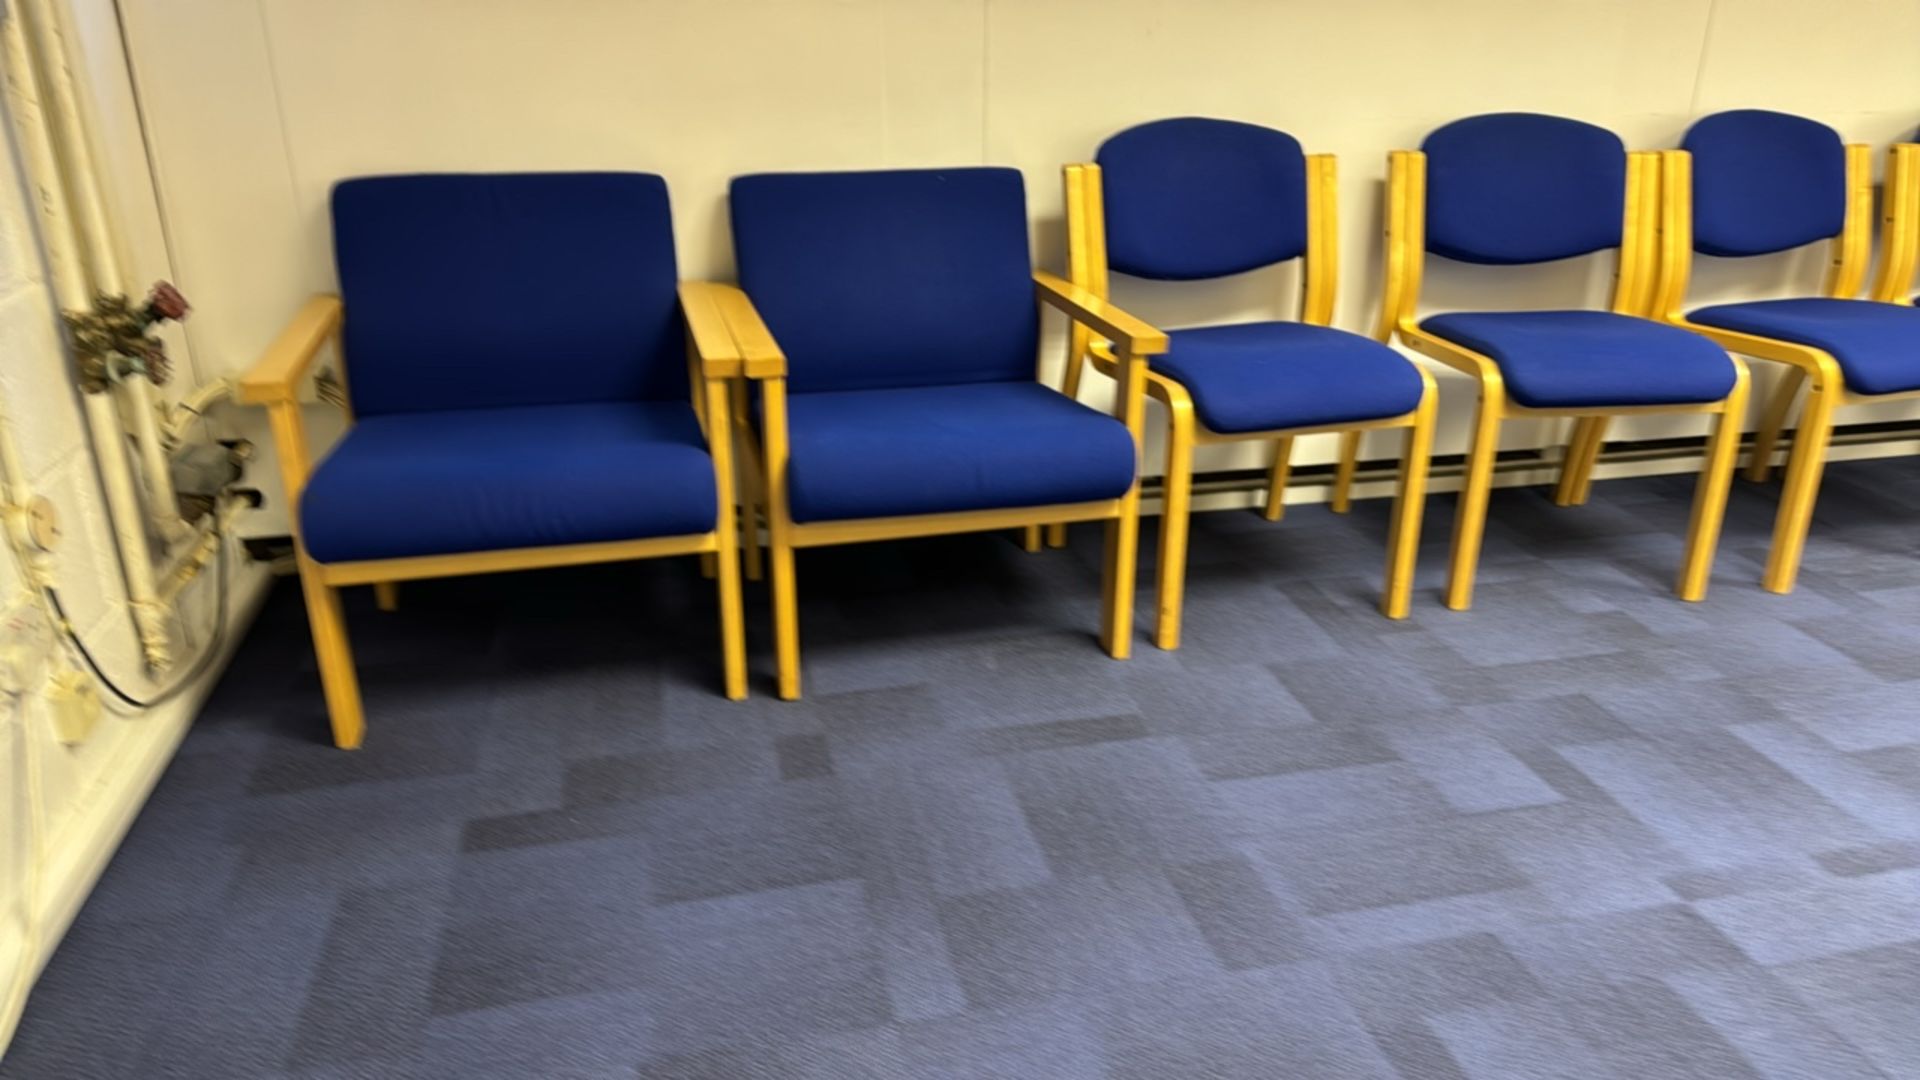 Set Of 7 Waiting Room Chairs - Image 2 of 4